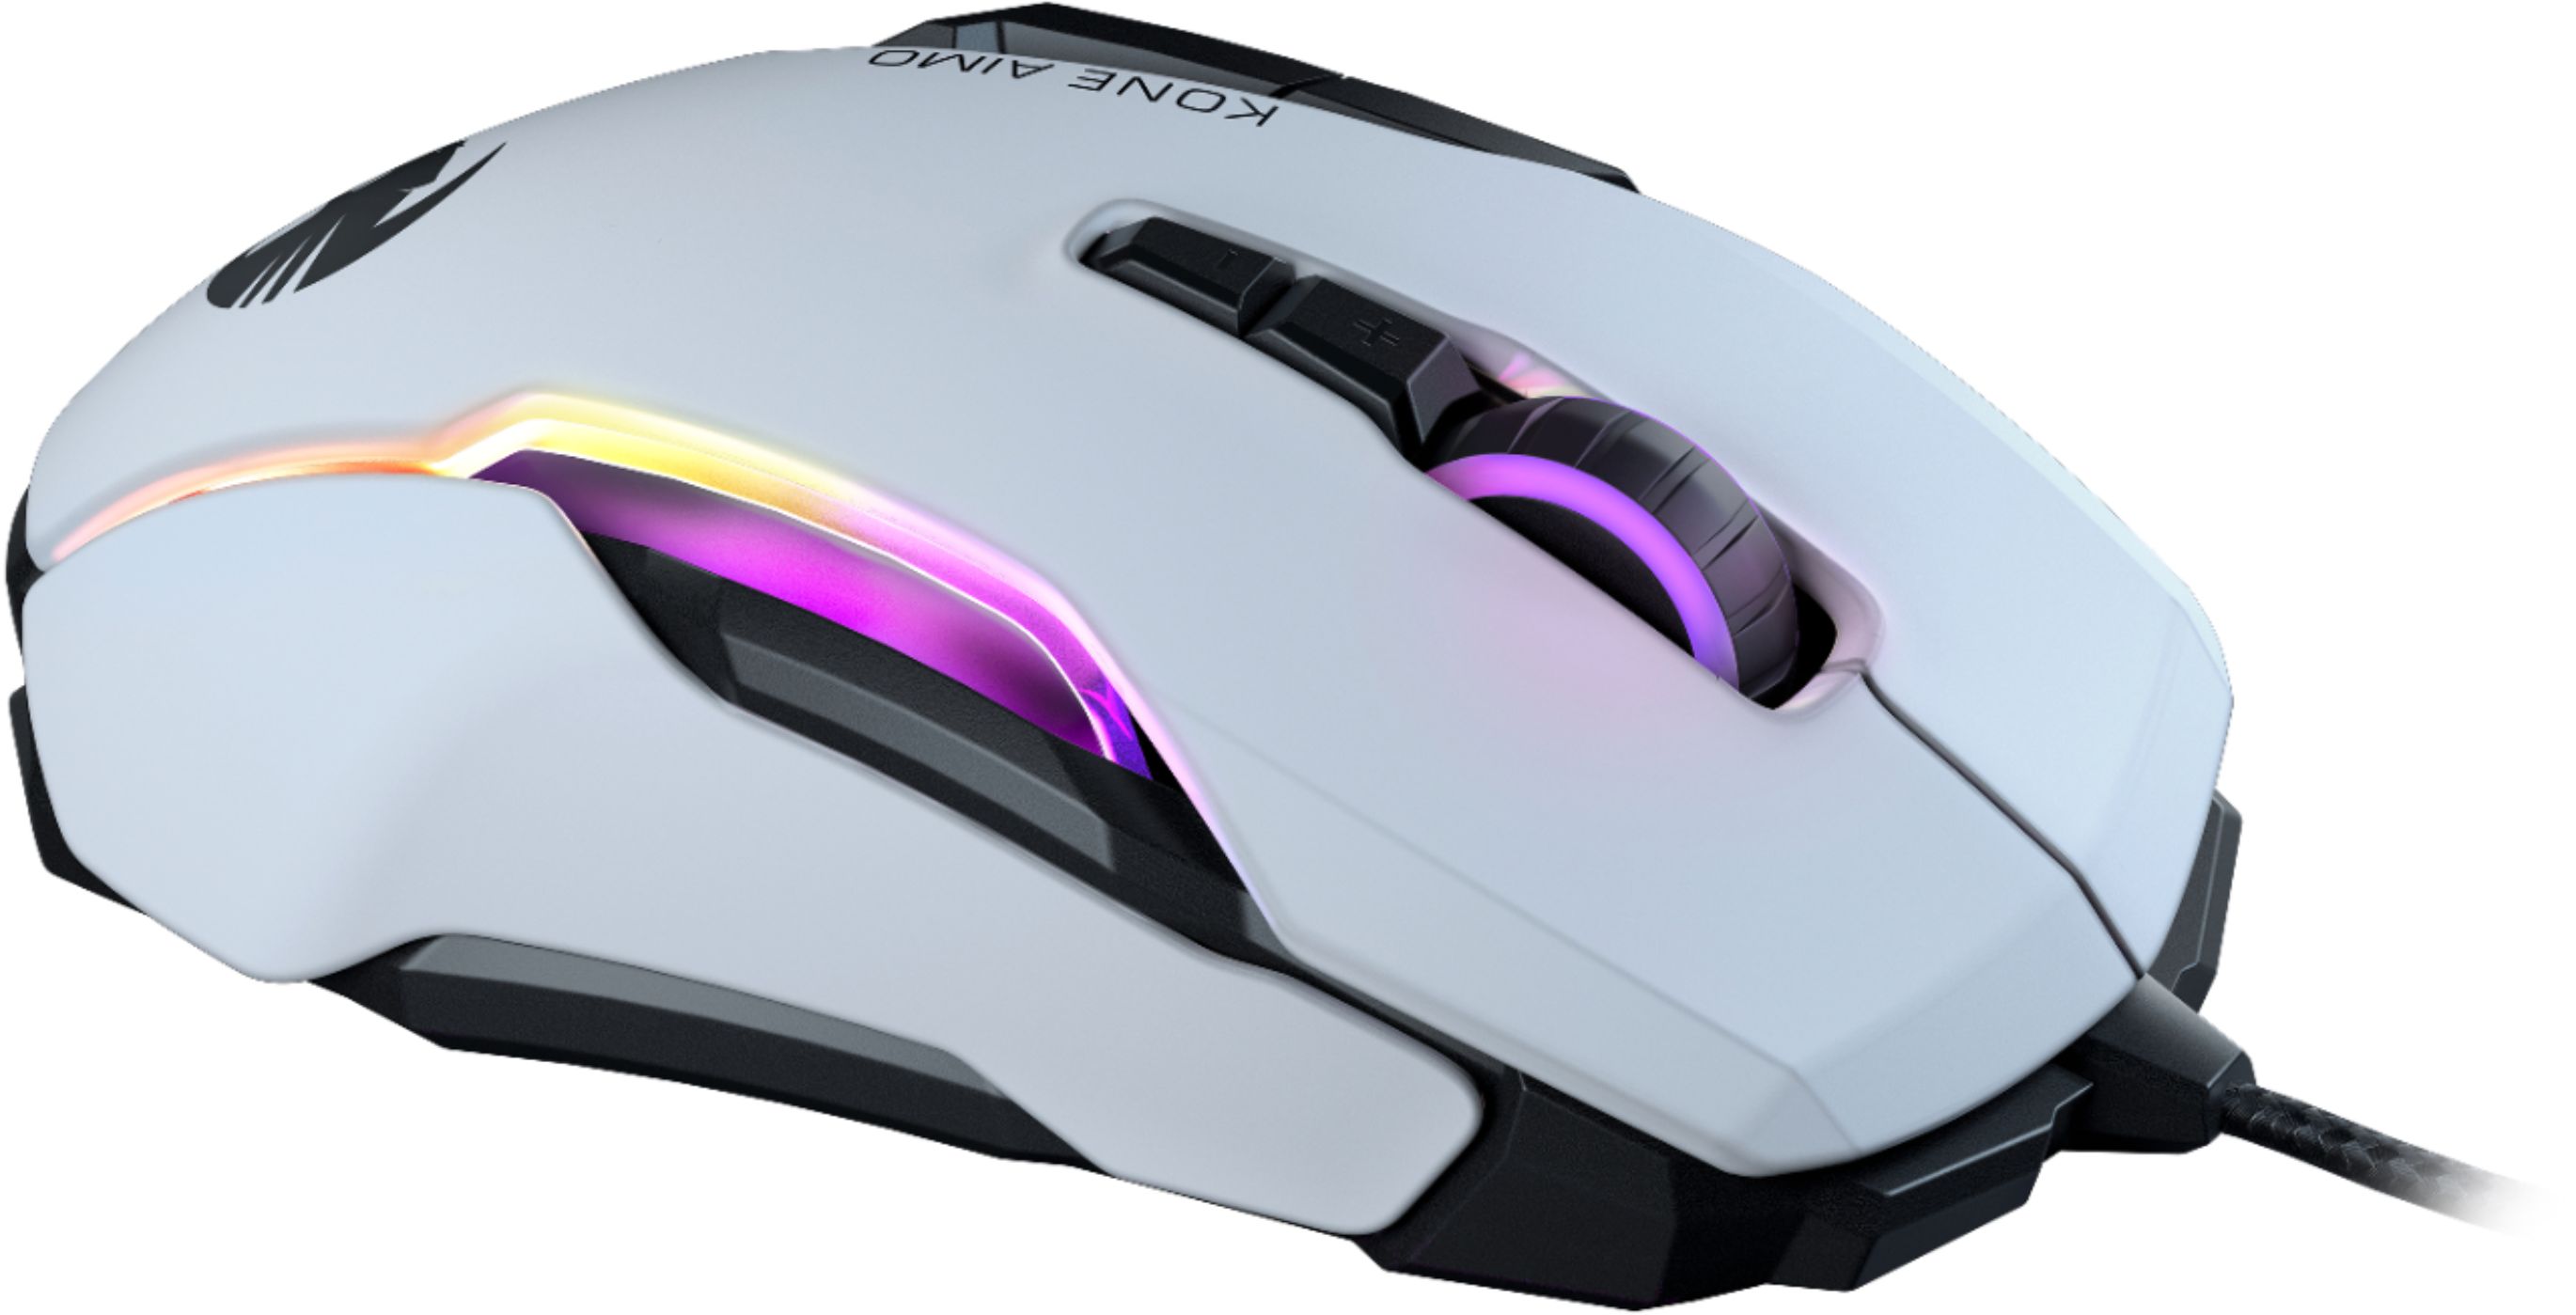 ROCCAT Kone AIMO Remastered PC Gaming Mouse